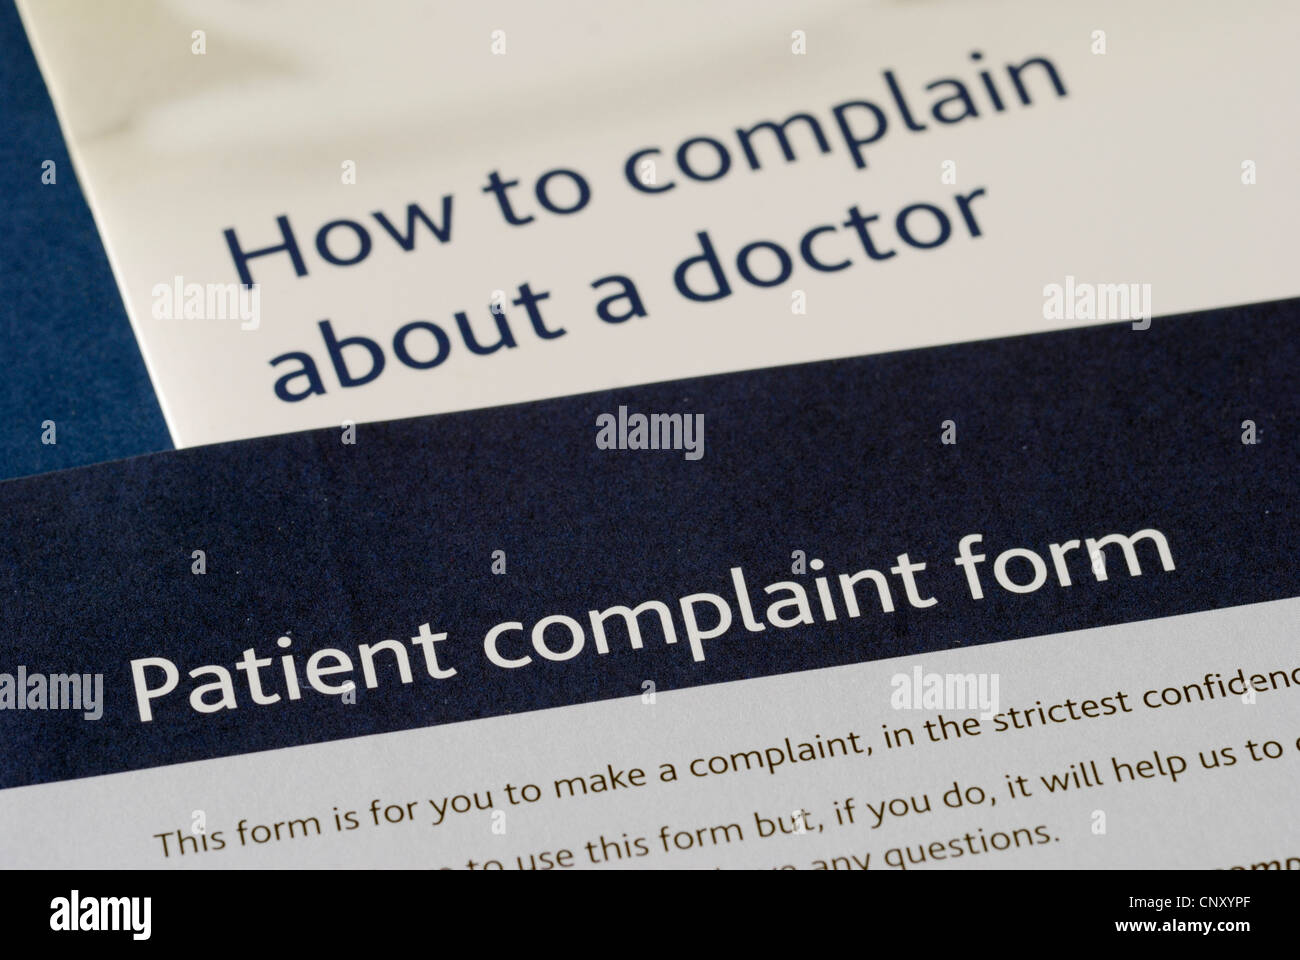 Patient complaint form and details of how to complain about a doctor Stock Photo